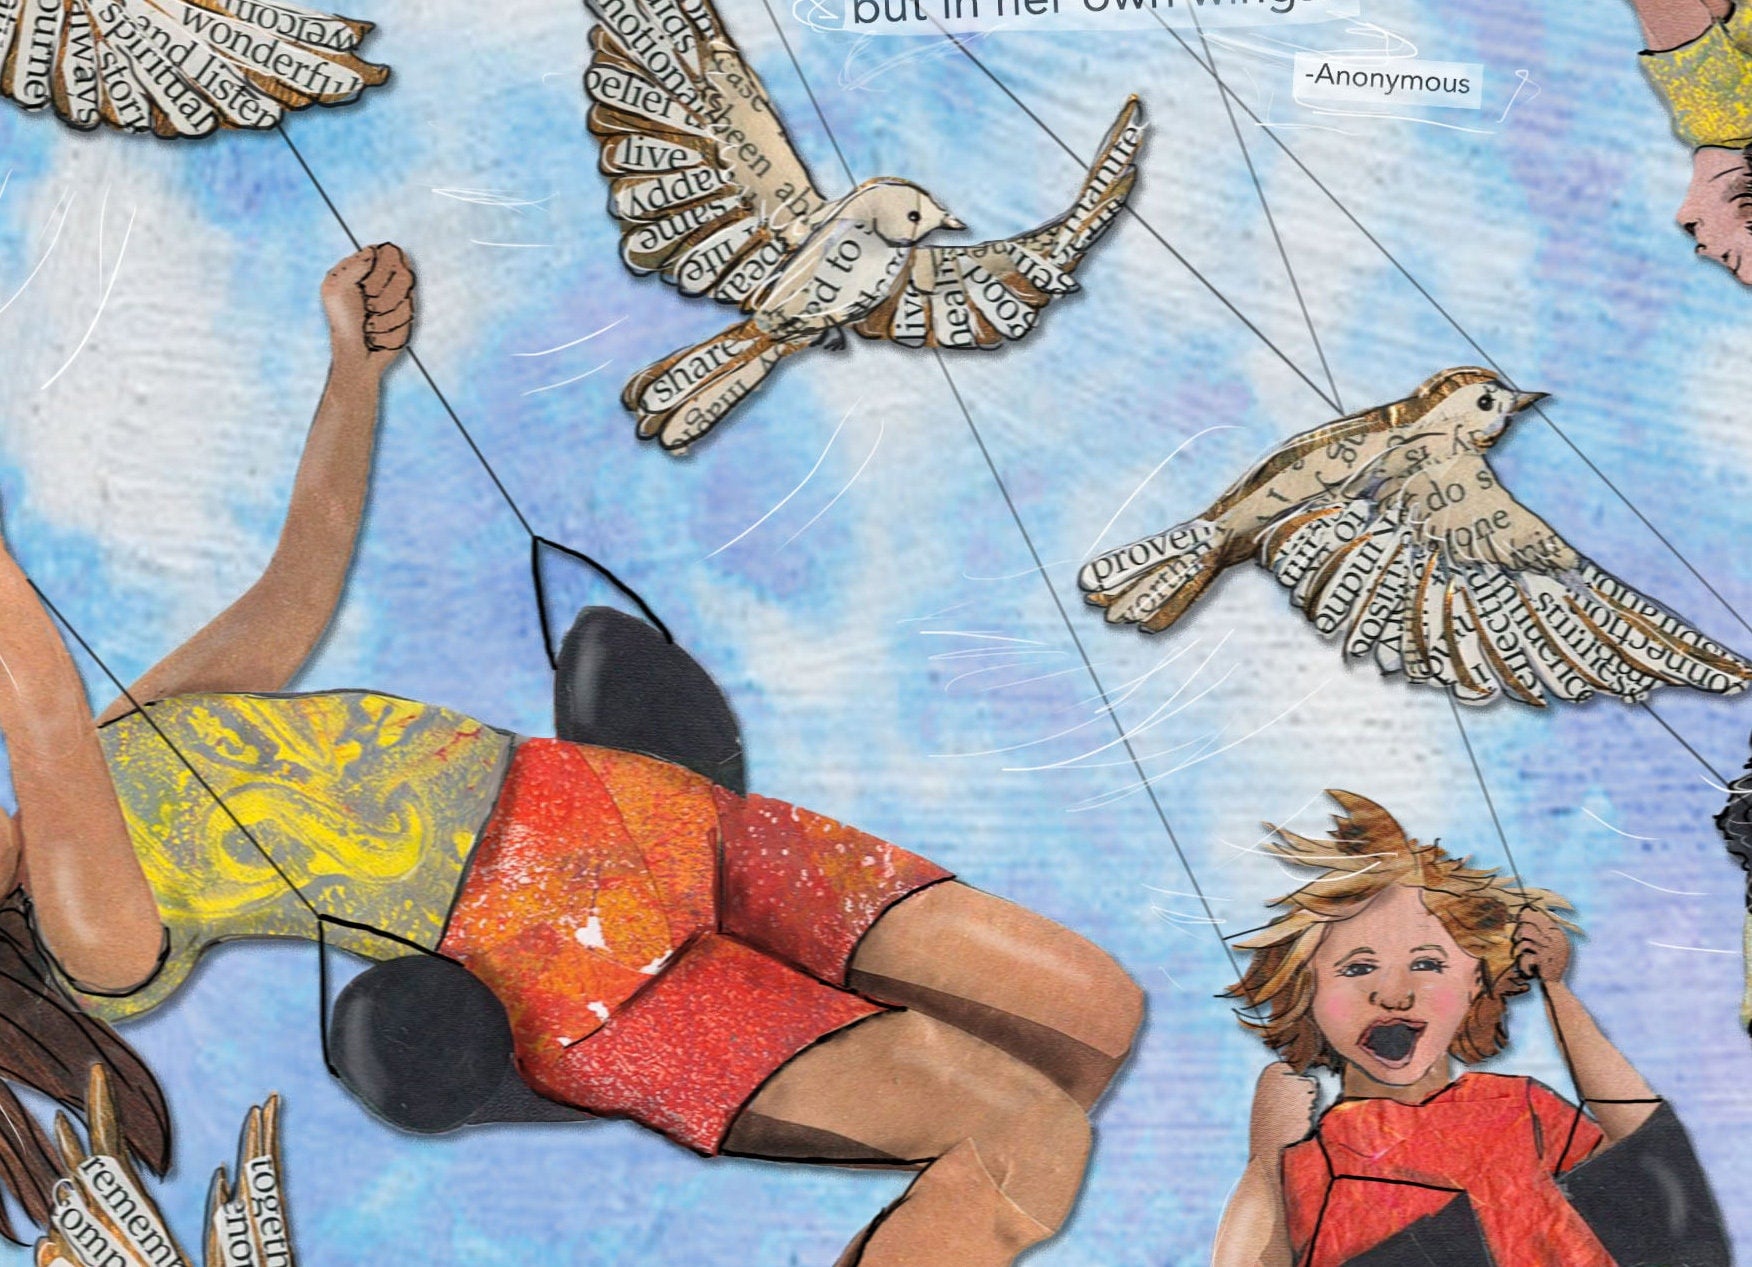 Greeting Card of mixed media collage of children swinging in the air with birds flying around them, inspirational quote - Blank Inside